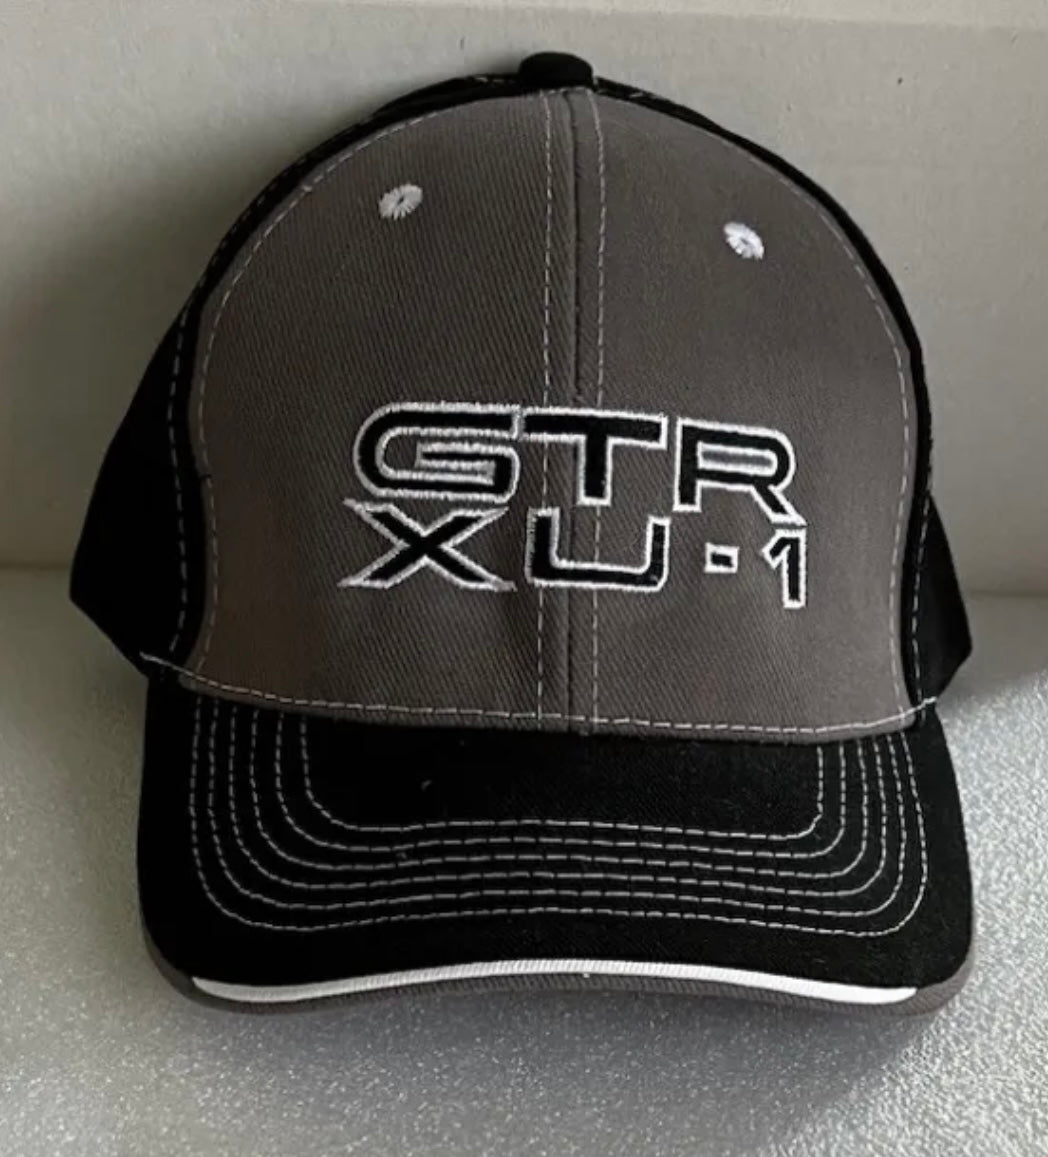 GTR XU-1 Embroidered Hat